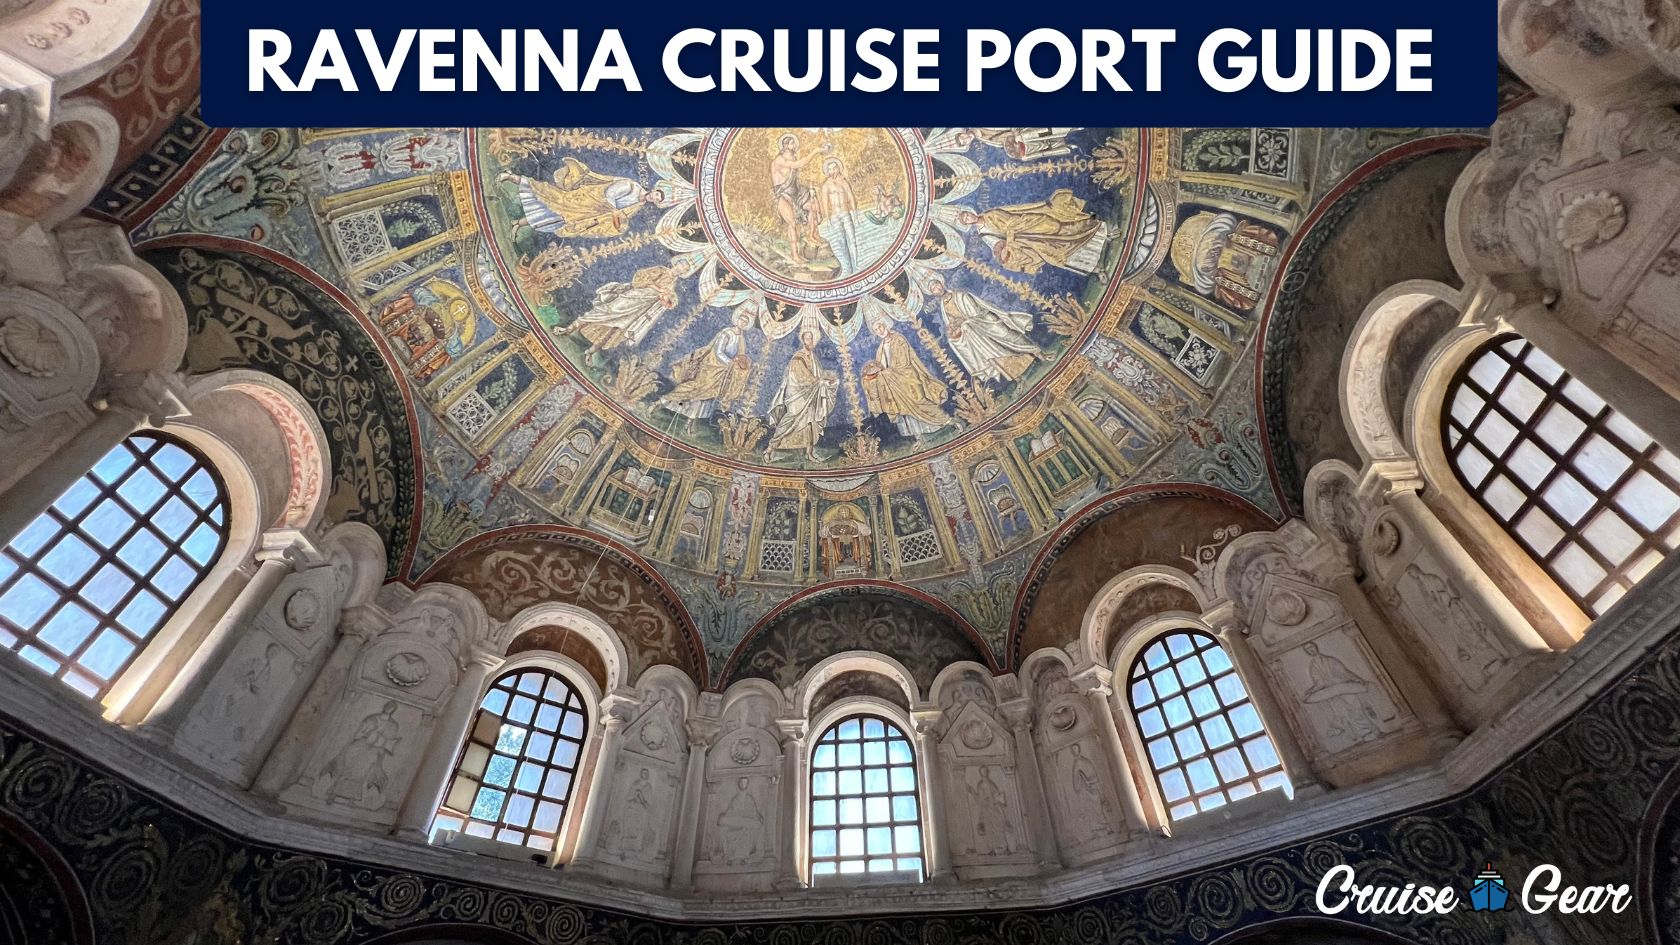 Ravenna Cruise Port - Guide and Information